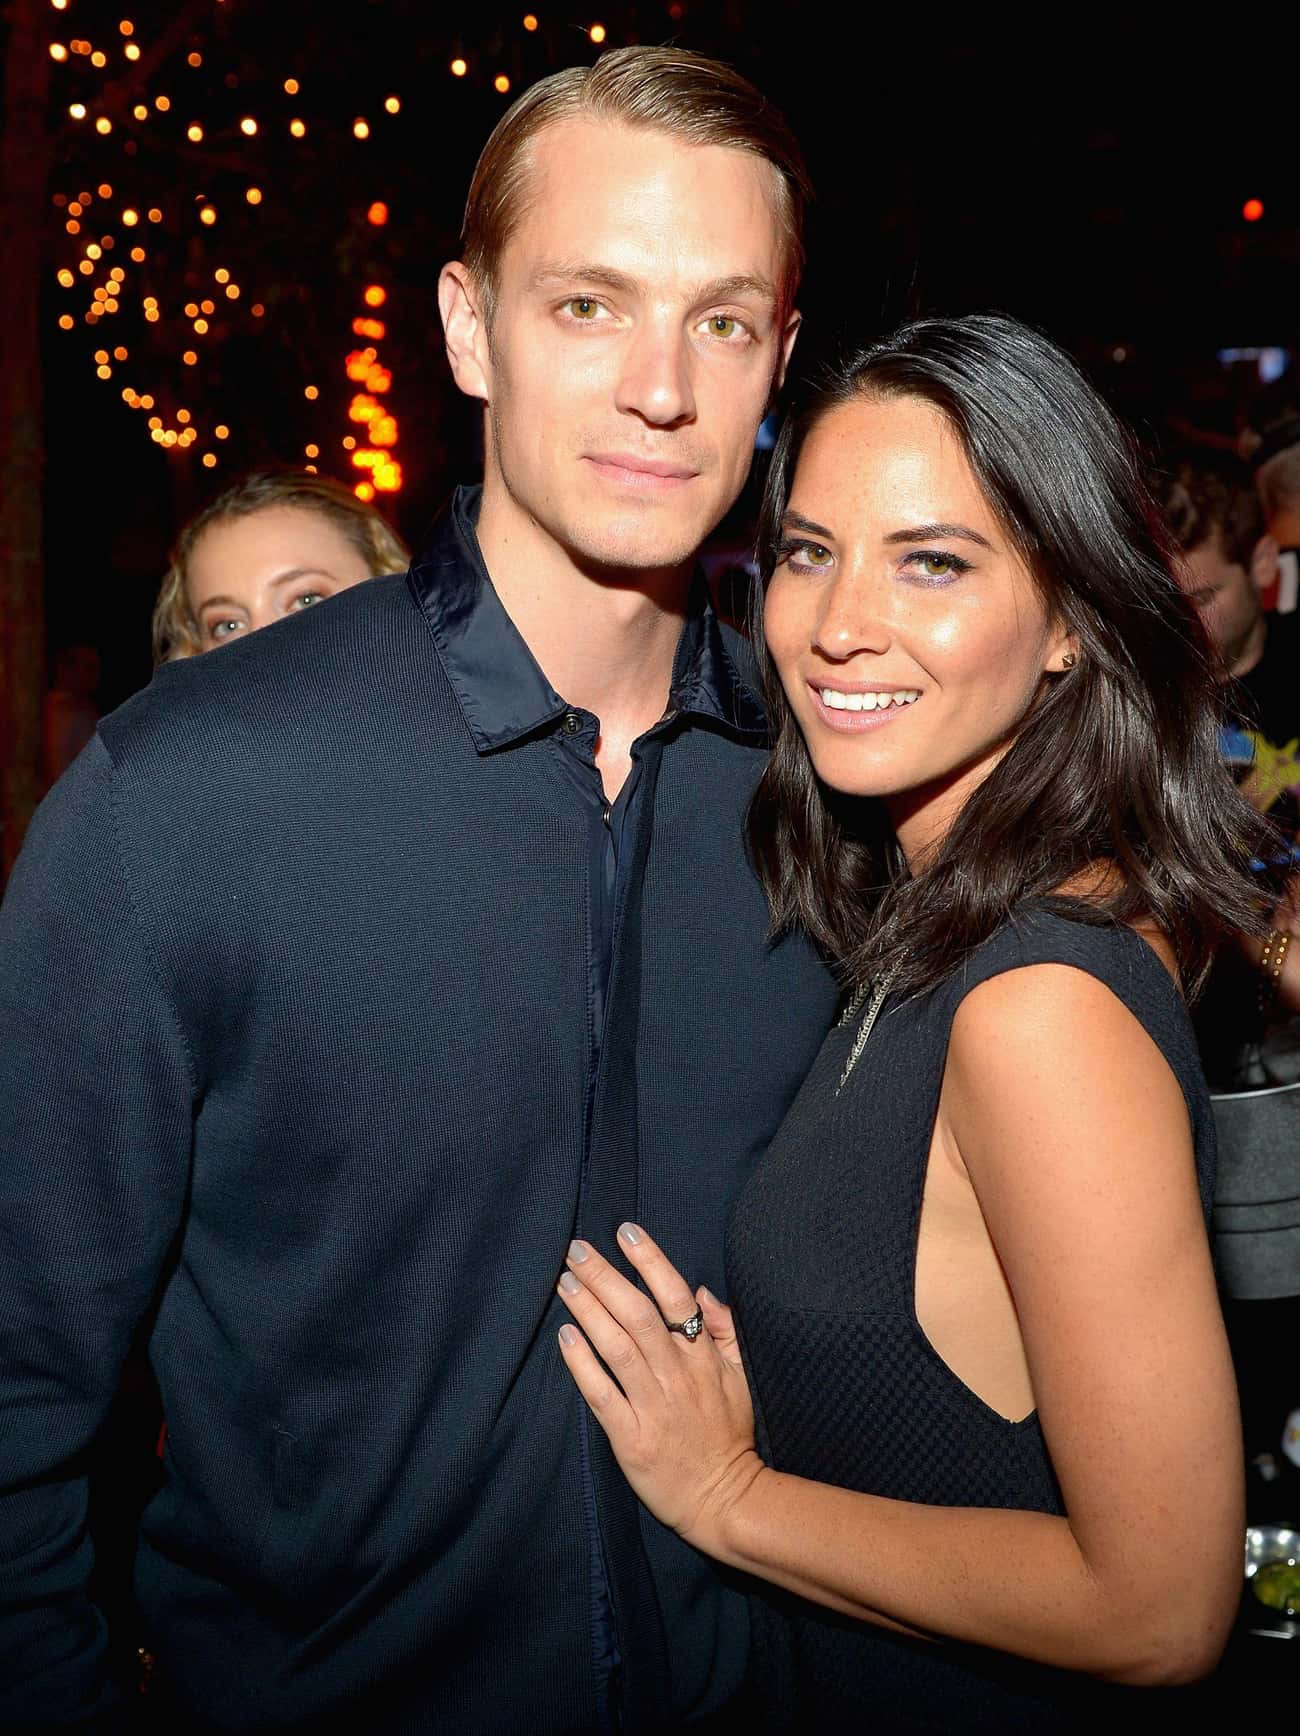 Who Has Joel Kinnaman Dated? | His Dating History with Photos